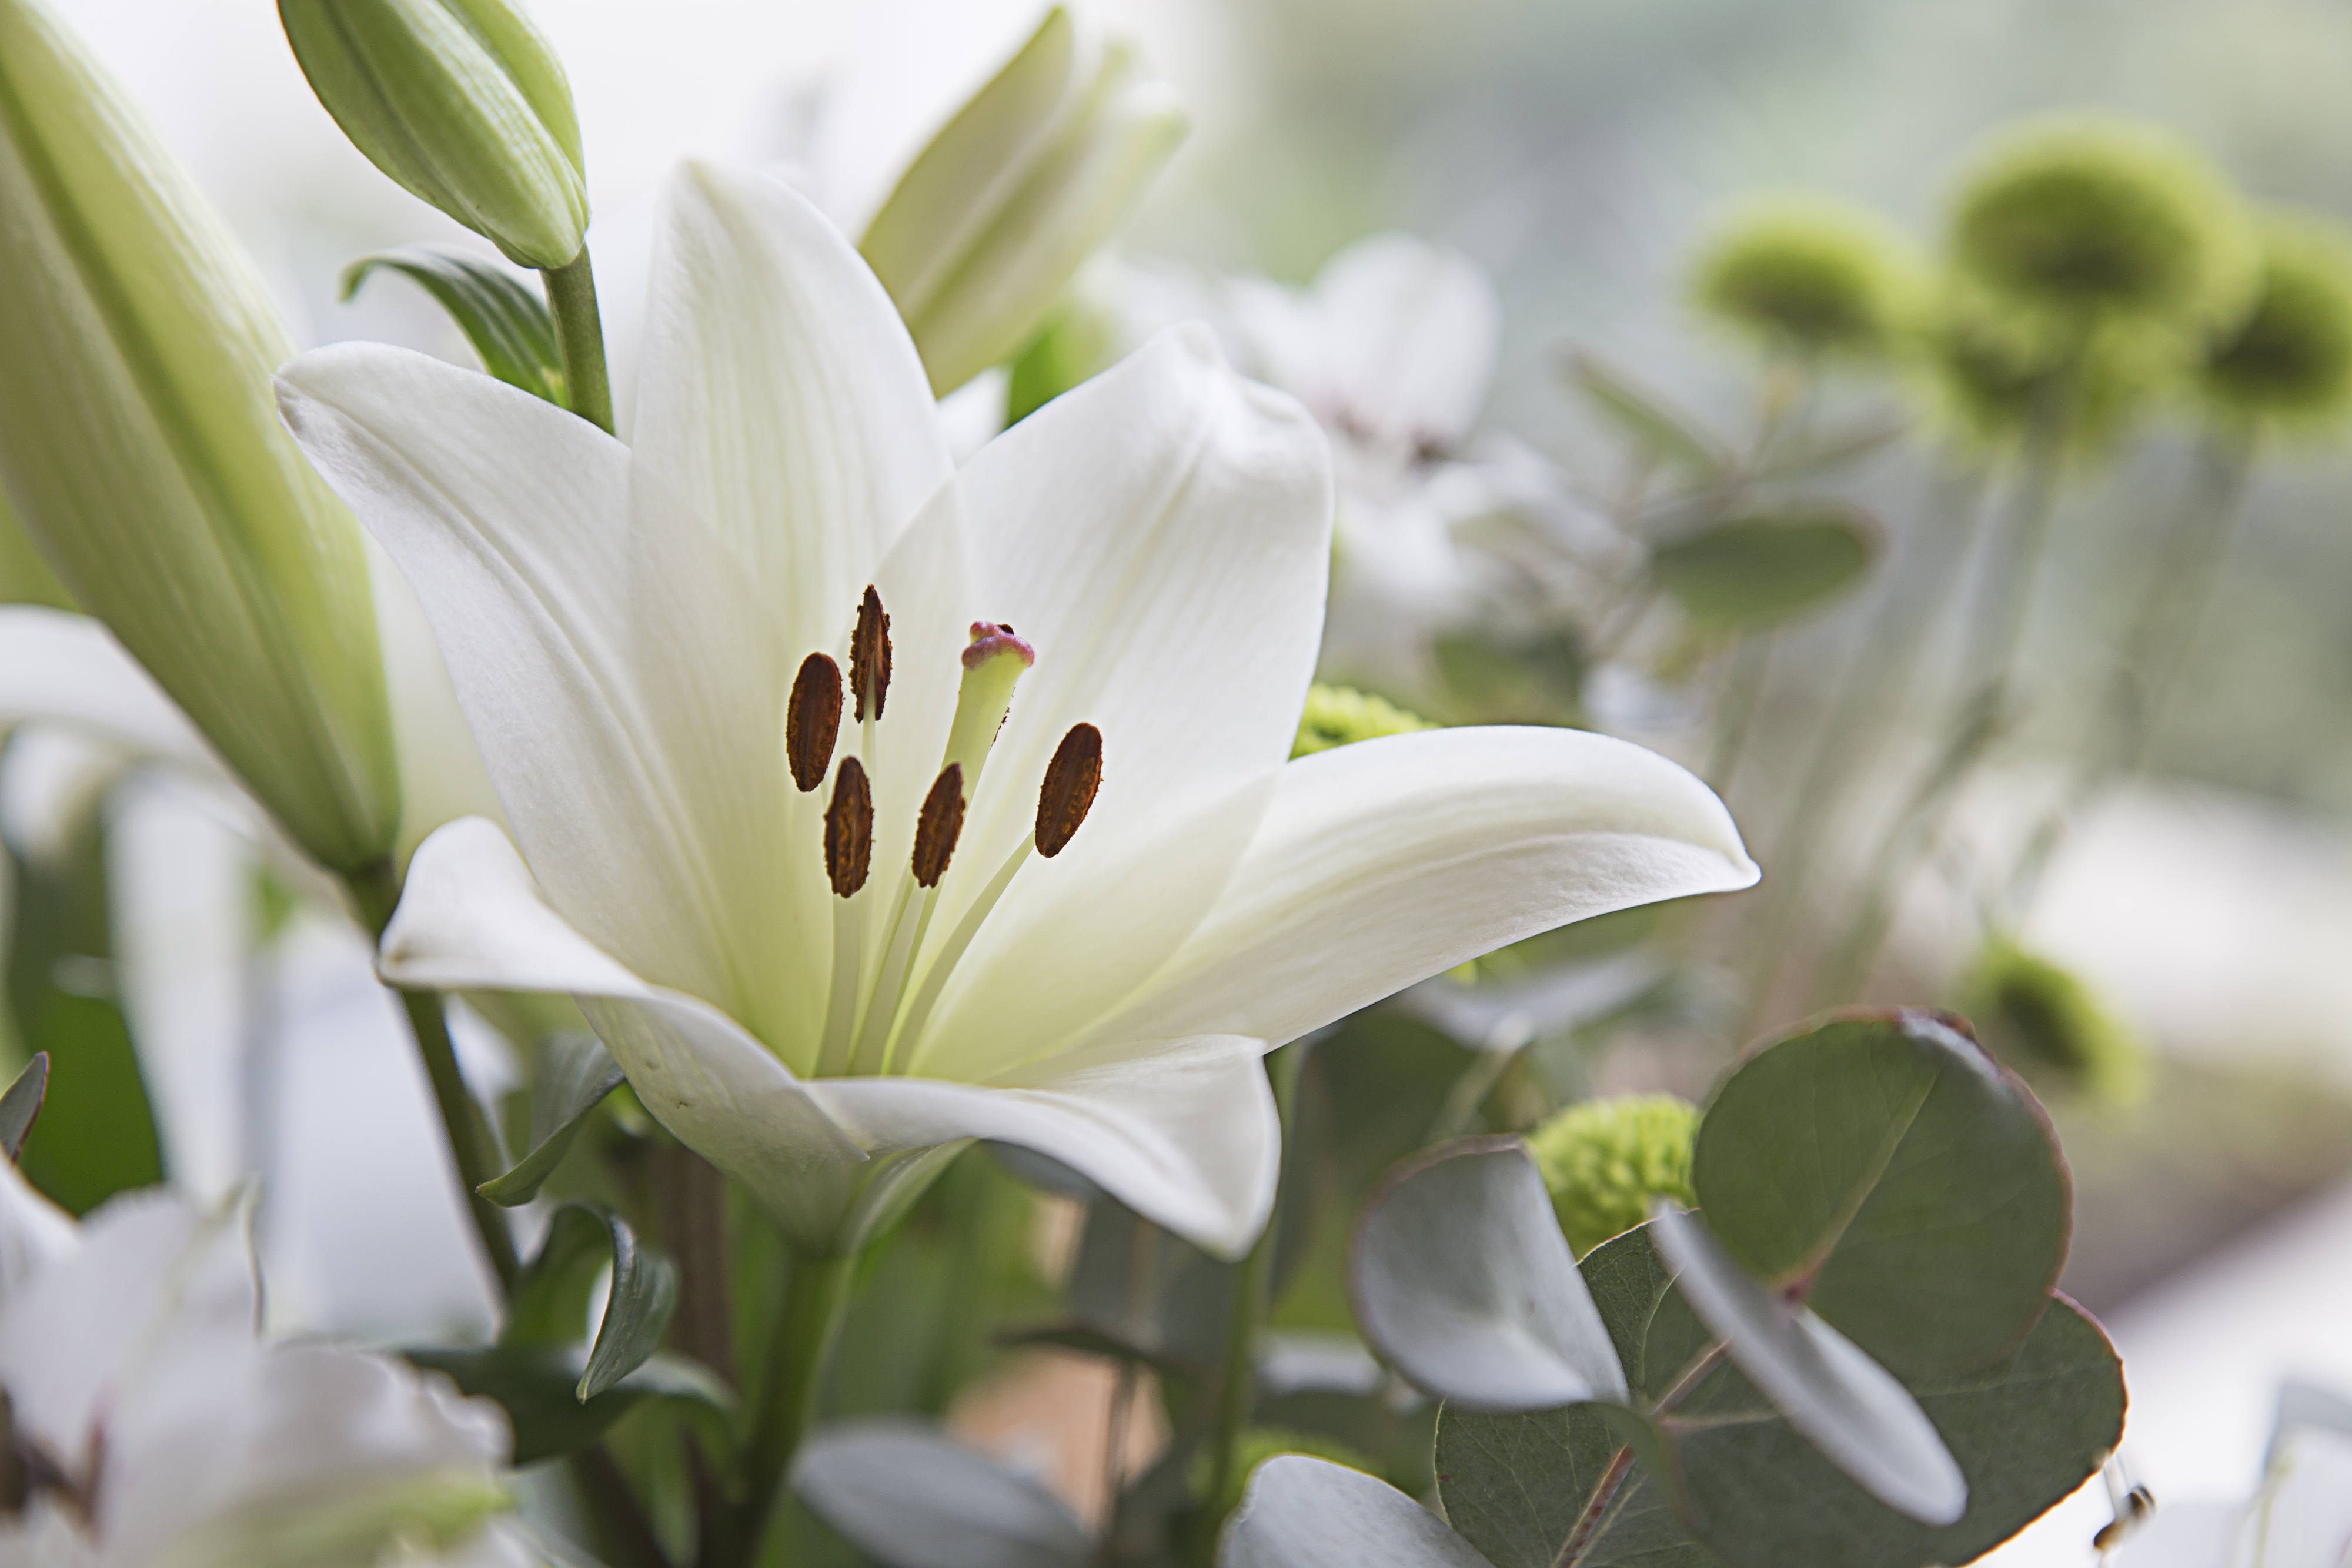 Close-up of a blooming white lily amongst other green and white foliage in a blurred background